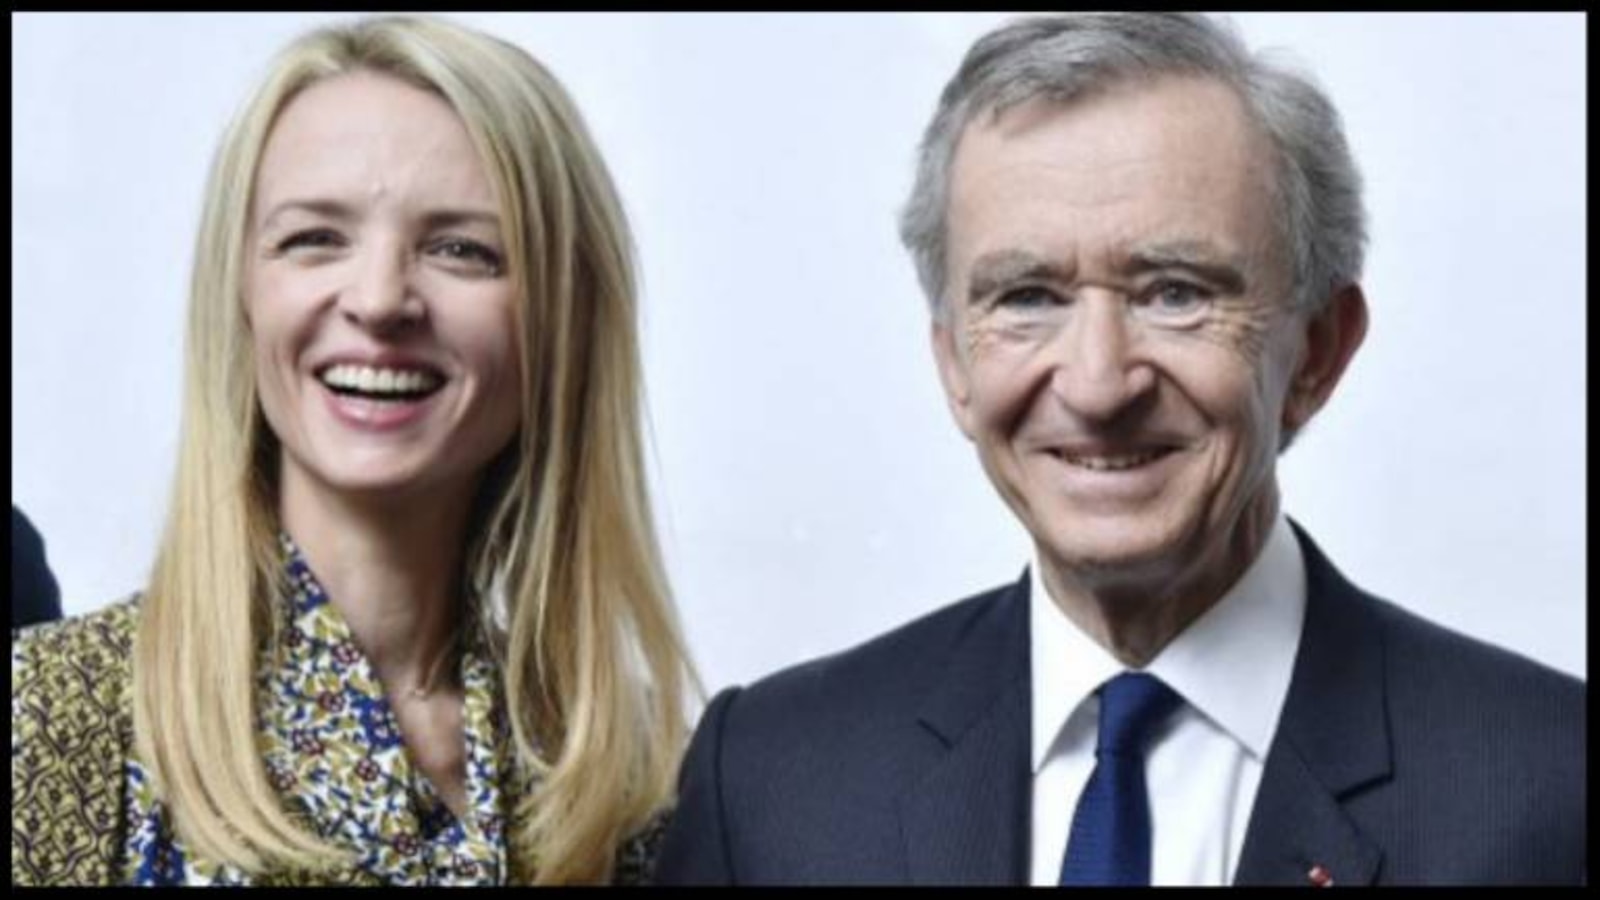 Delphine Arnault appointed by father Bernard Arnault to run Dior